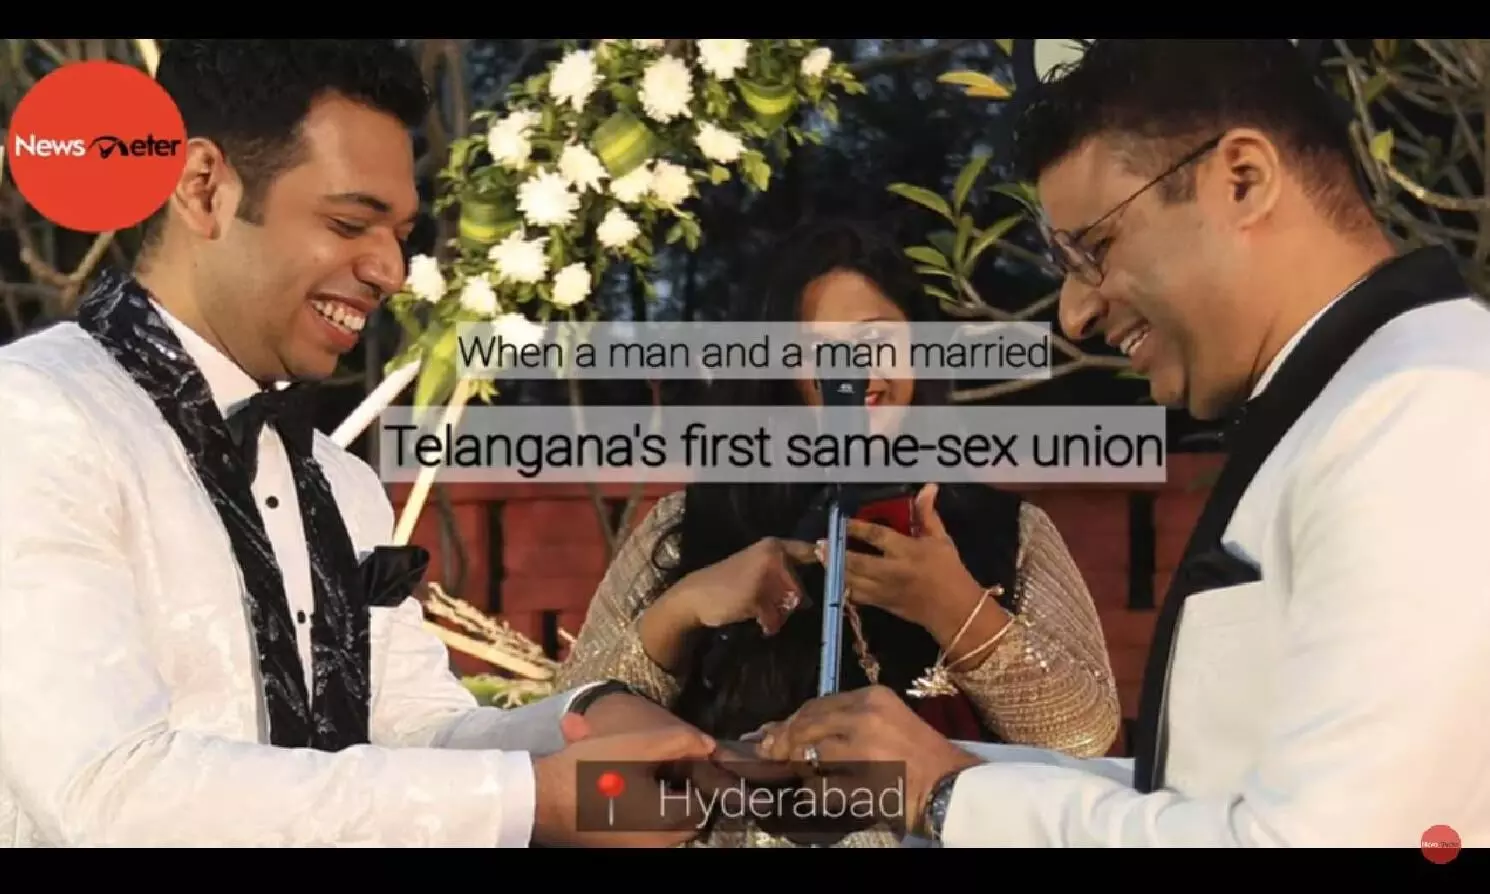 First same-sex union in Telangana